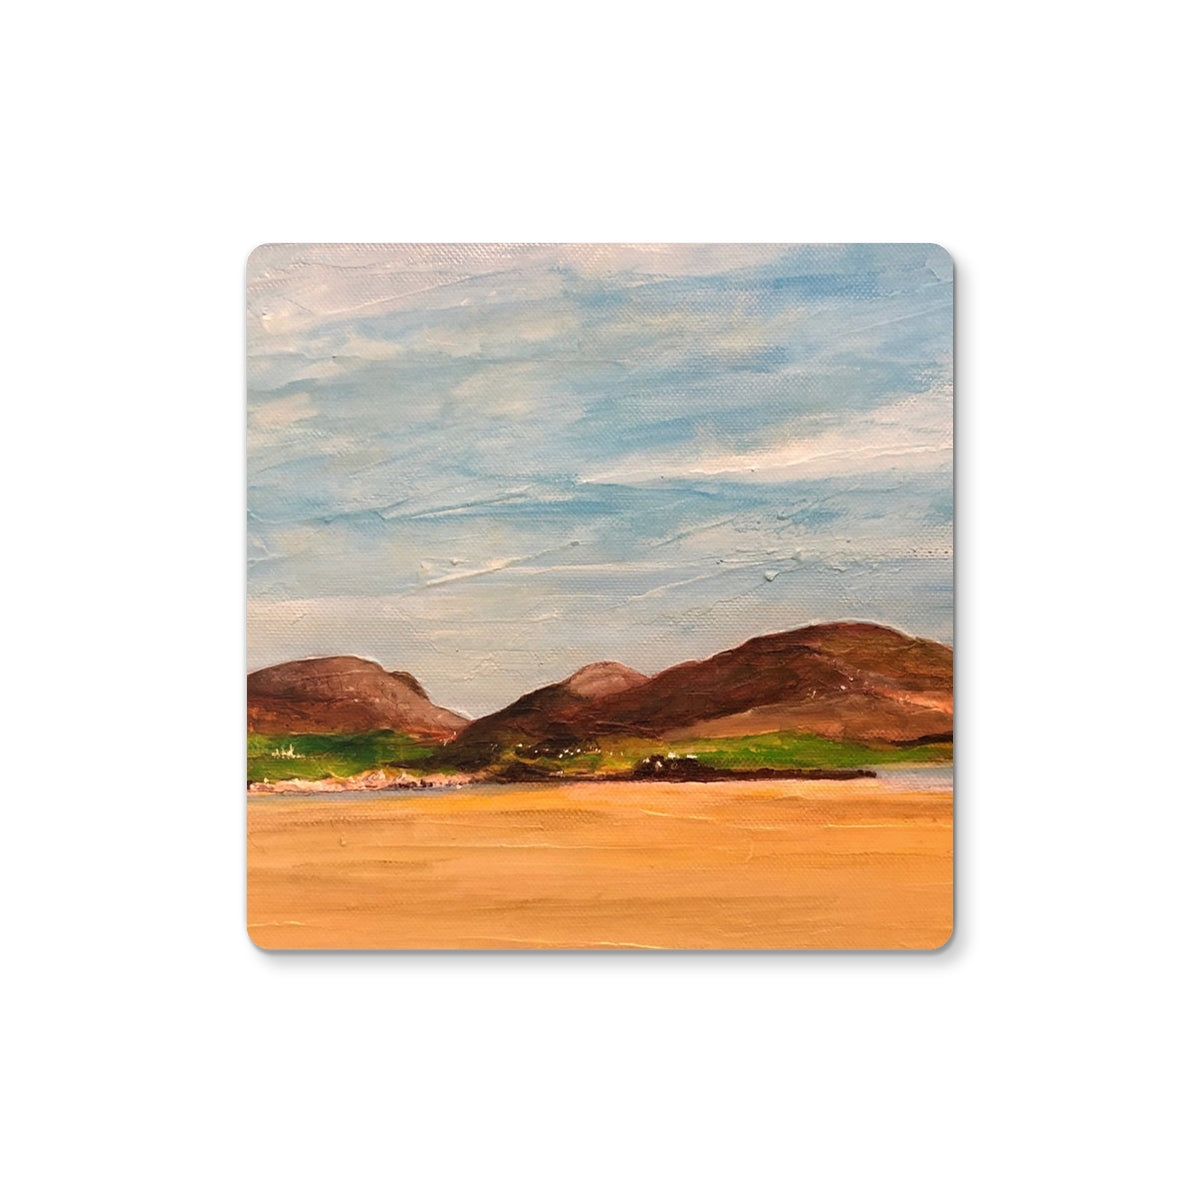 Uig Sands Lewis Art Gifts Coaster-Coasters-Hebridean Islands Art Gallery-Single Coaster-Paintings, Prints, Homeware, Art Gifts From Scotland By Scottish Artist Kevin Hunter